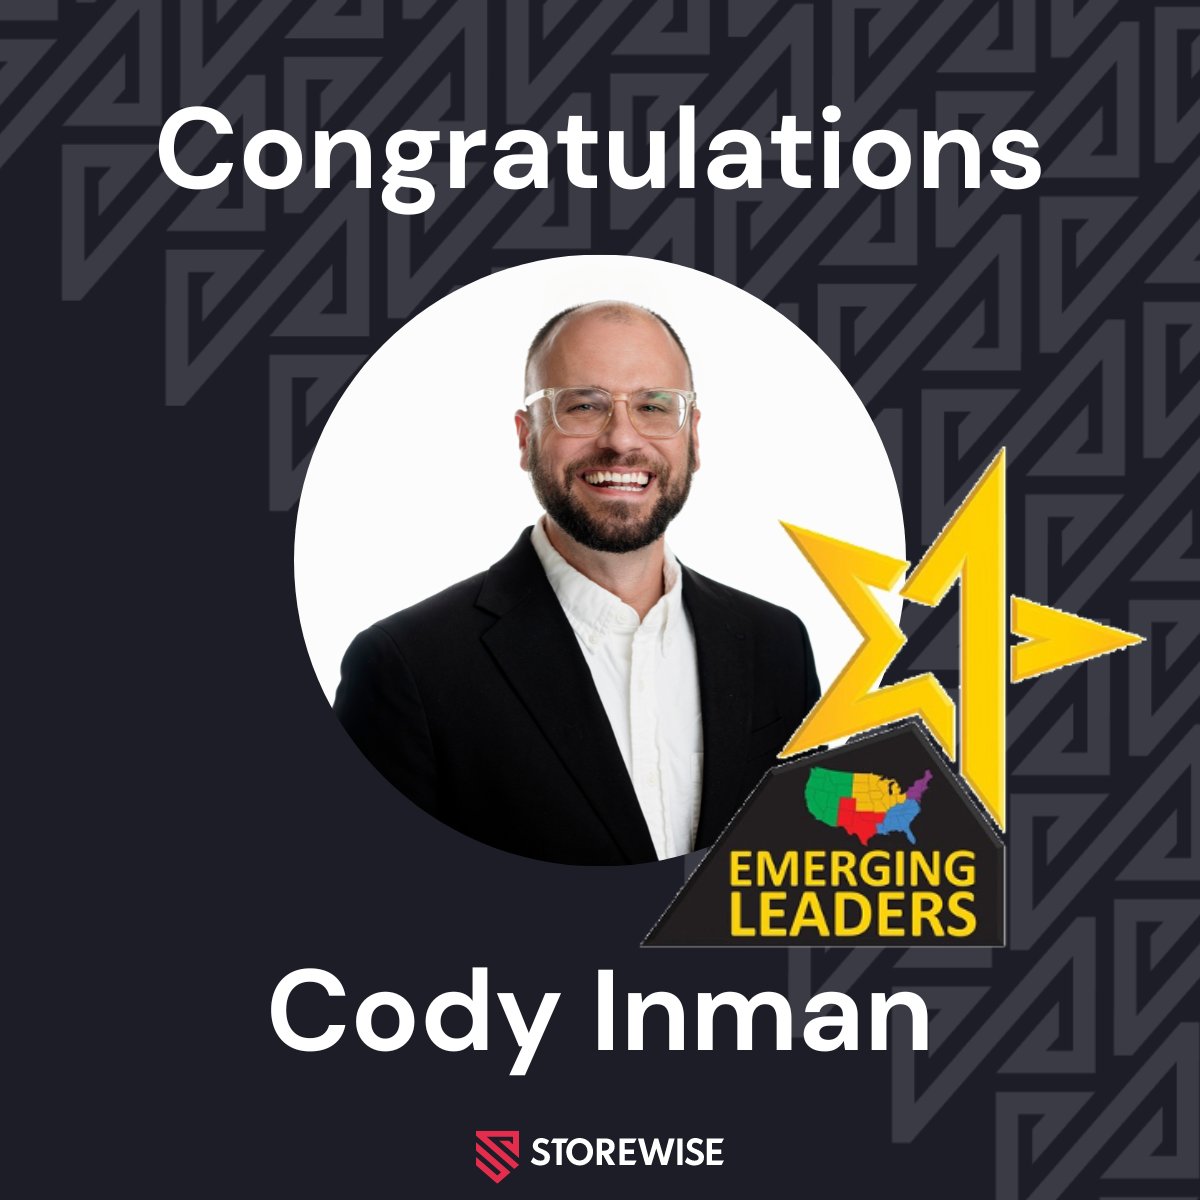 Join us in a round of applause for our VP of Technology, Cody Inman on being recognized by @theshelbyreport as an Emerging Leader in the industry! 👏👏 We would not be where we are today without your enthusiasm and dedication. 

#grocerytech #leadership #storewise #techleader